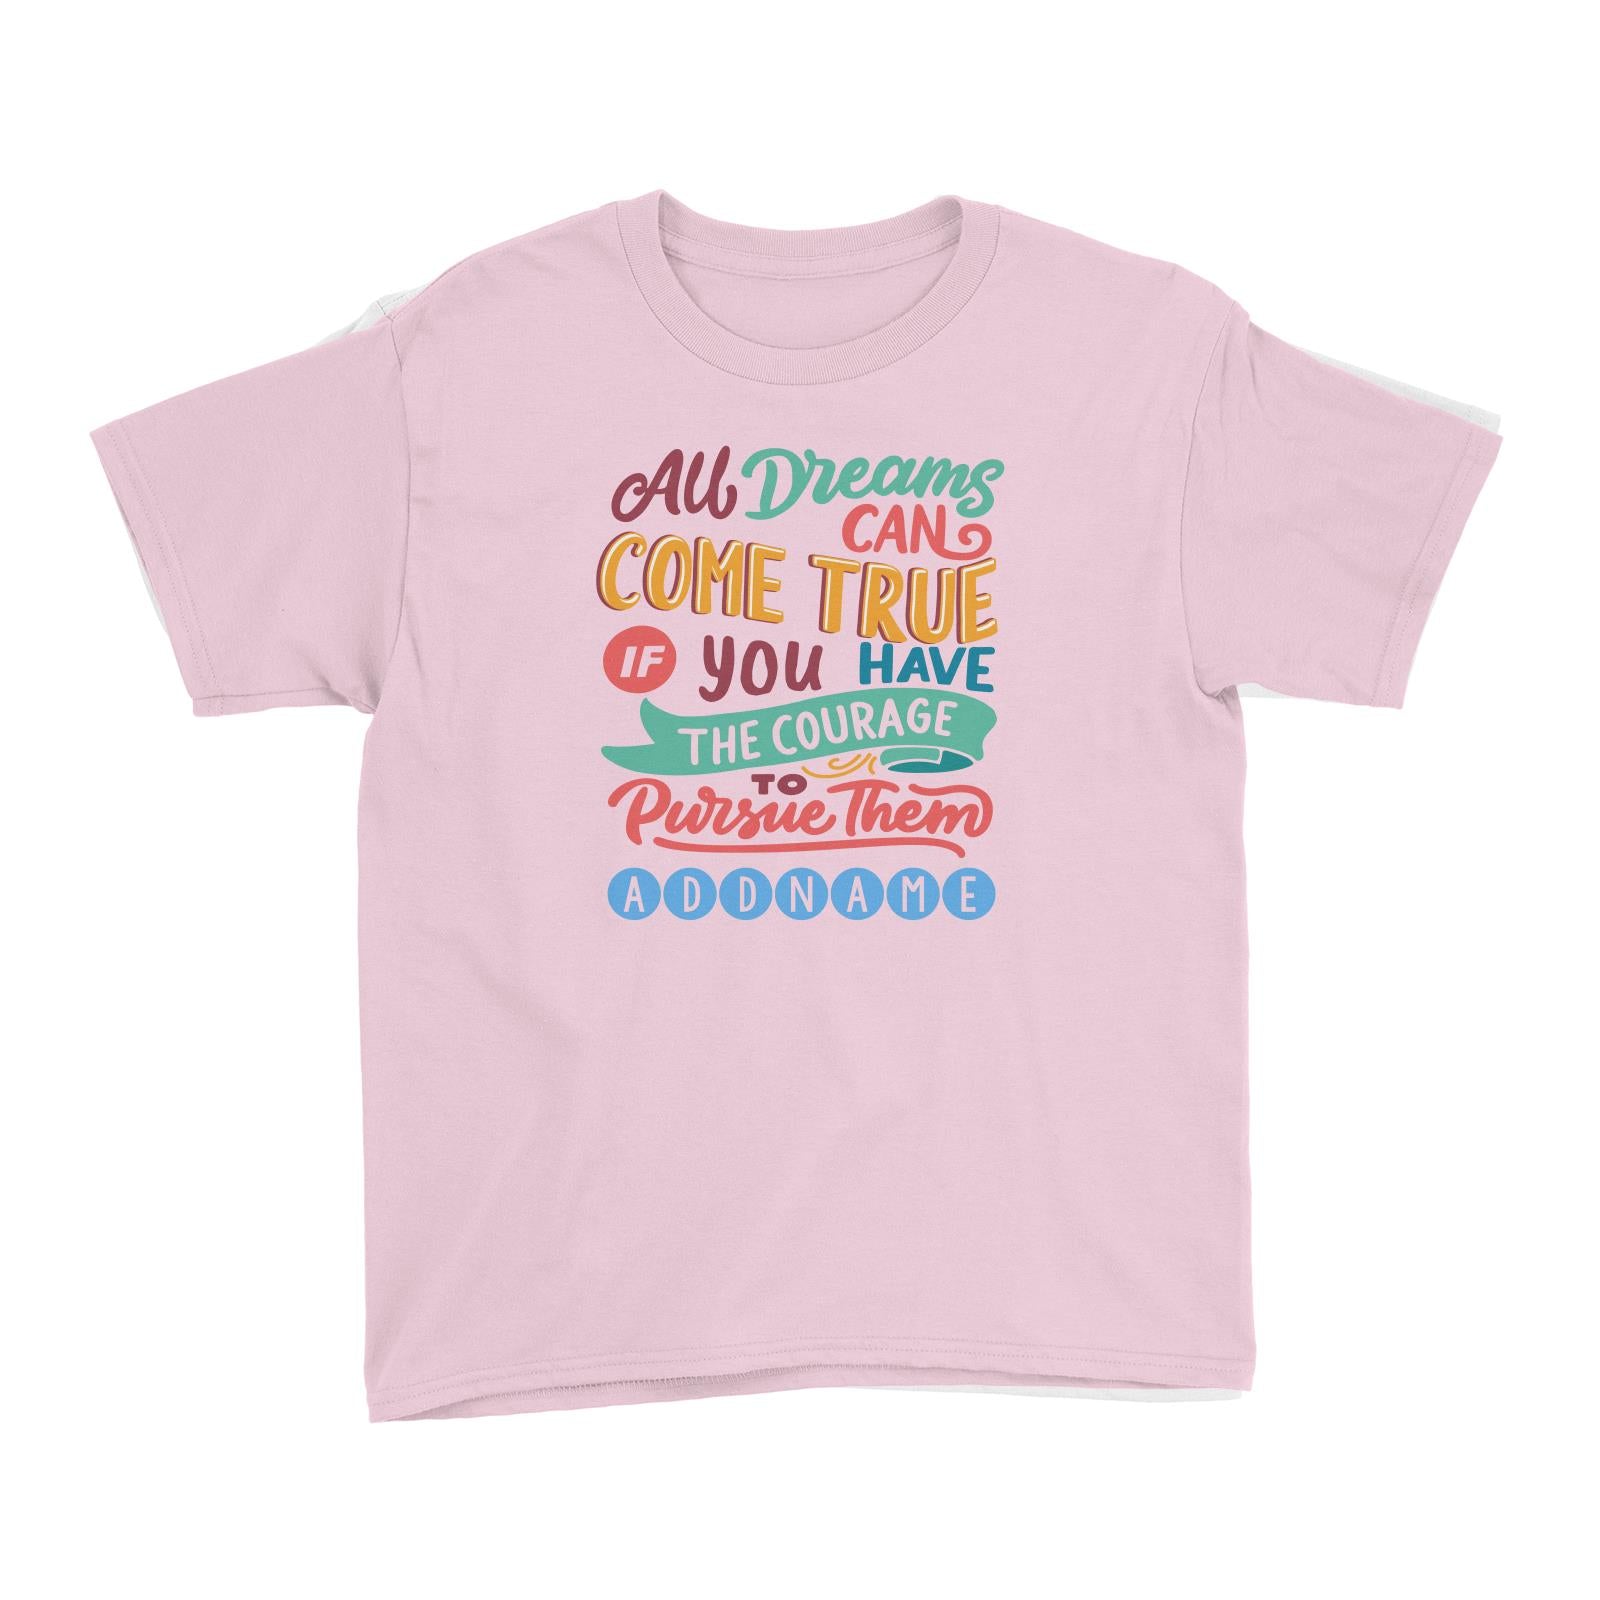 Children's Day Gift Series All Dreams Can Come True Addname Kid's T-Shirt